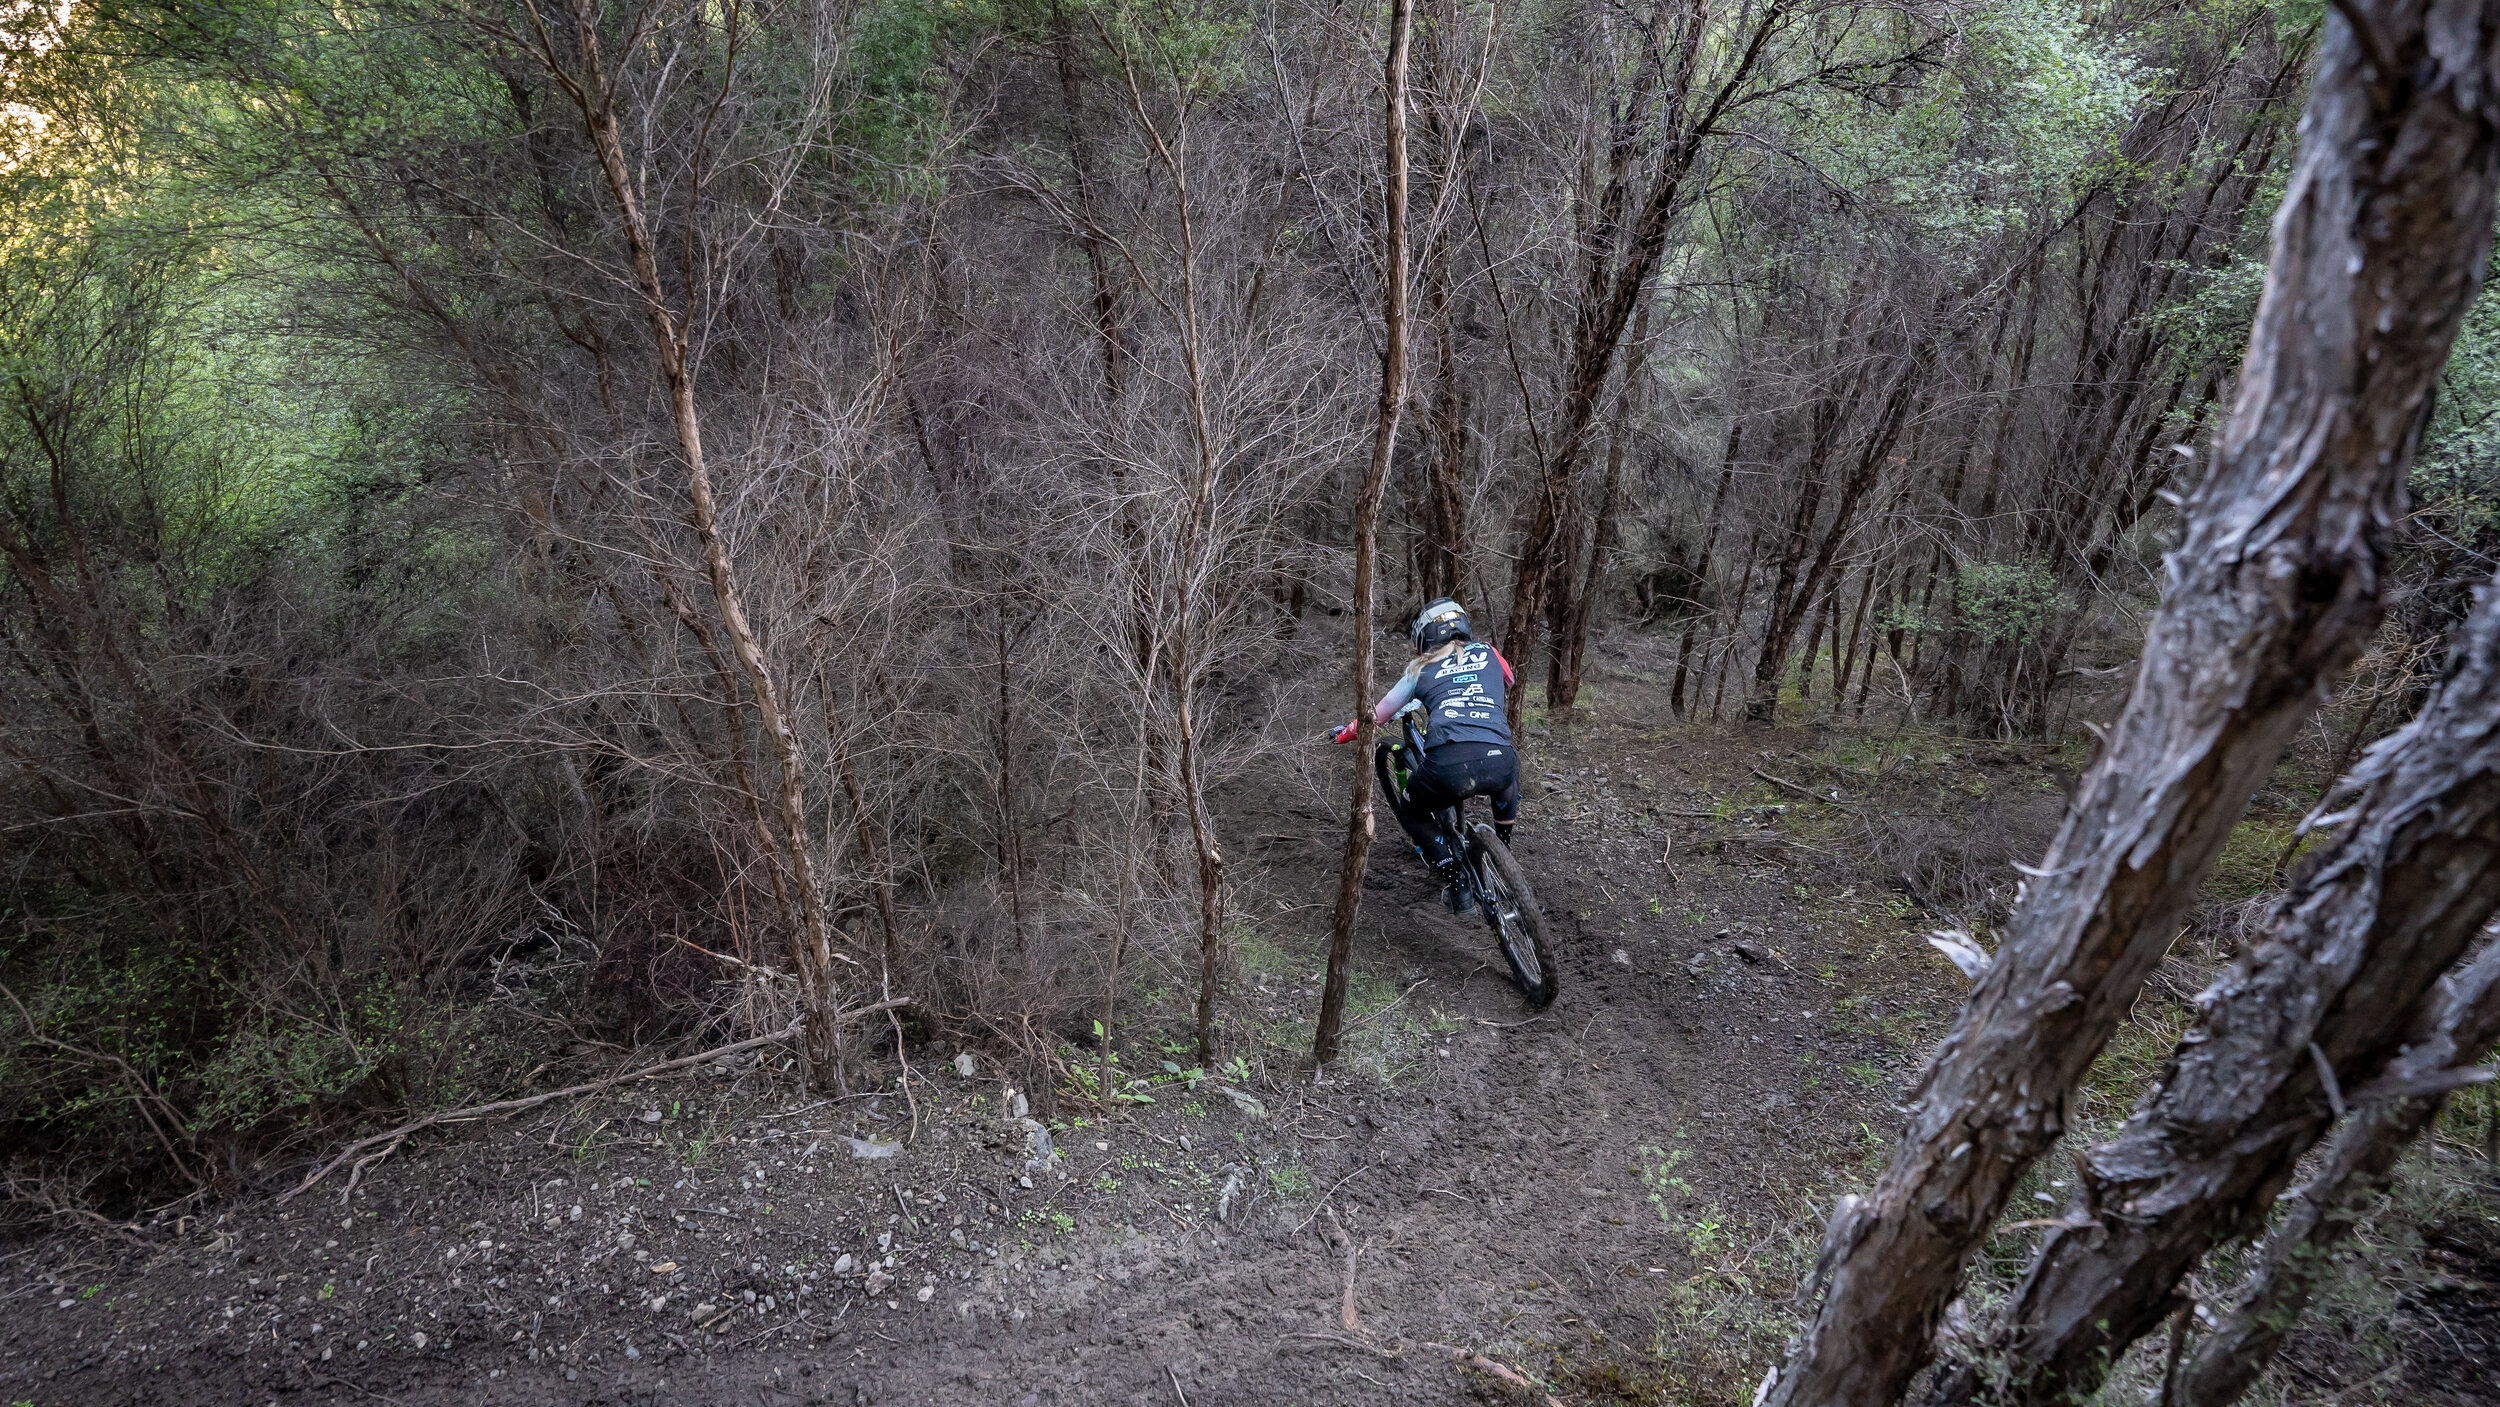 Rae Morrison makes some tight turns on stage 5 look easy.